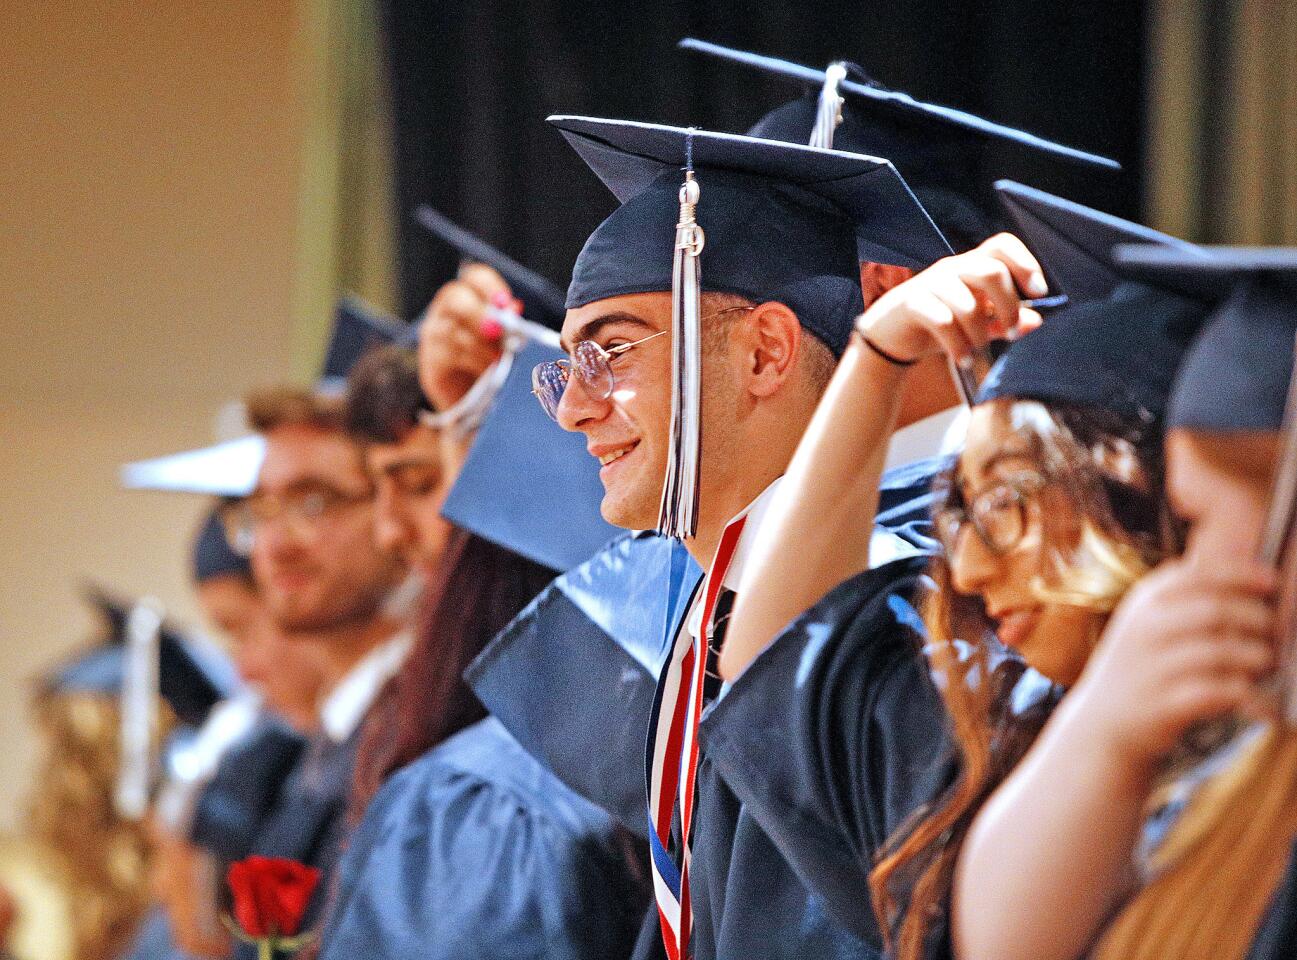 Graduating Daily High School senior Aram Baghdasaryan smiles to the audience after turning his tassel as a symbol of graduating at the graduation ceremony for Daily High School and Verdugo Academy at First United Methodist Church in Glendale on Monday, June 10, 2019.